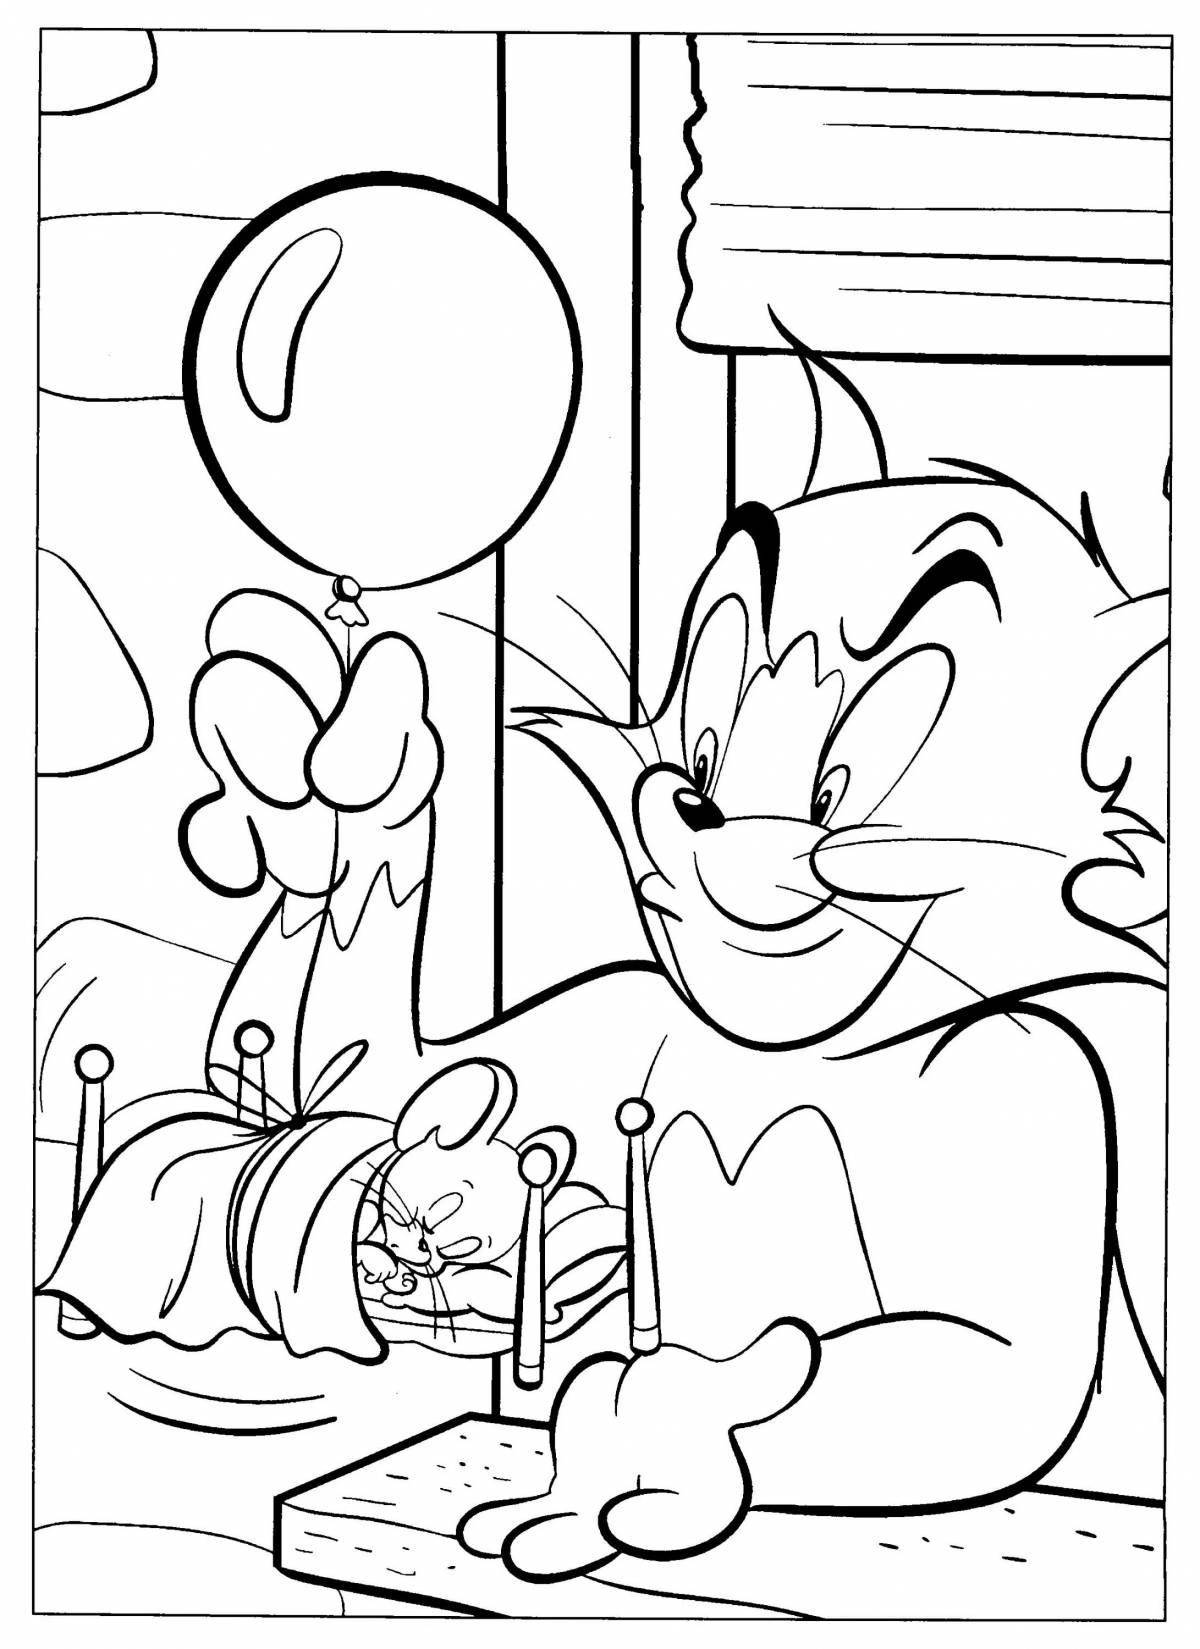 Colorful tom and jerry coloring game